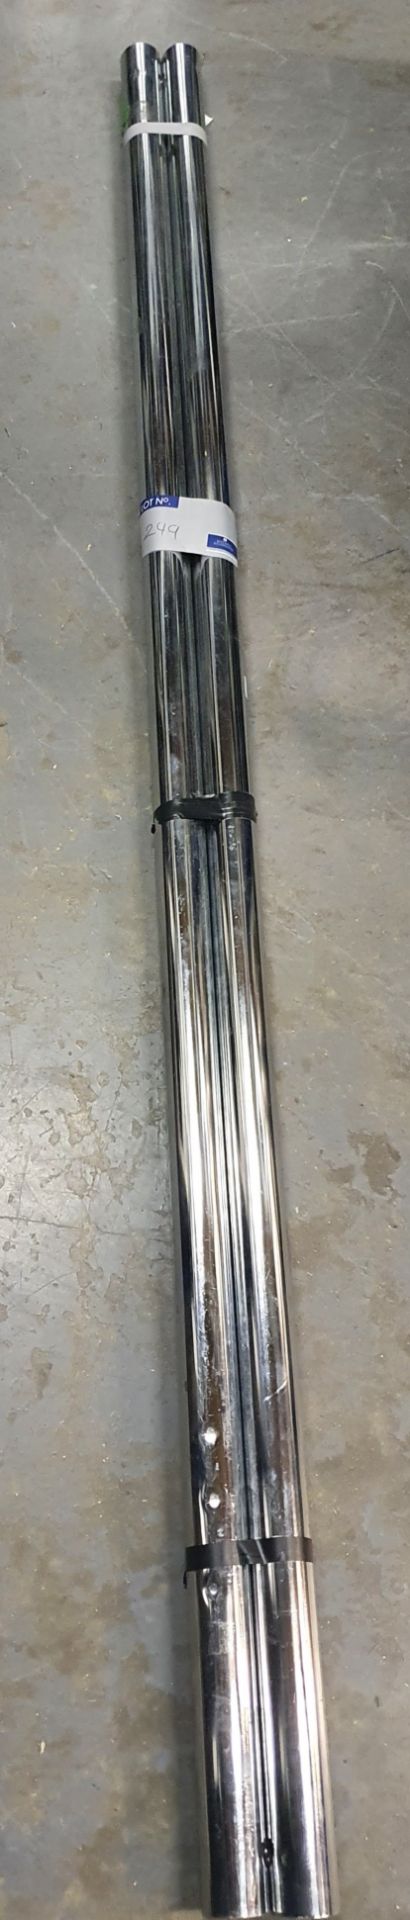 A pair of Unicol Poles, 2000mm.